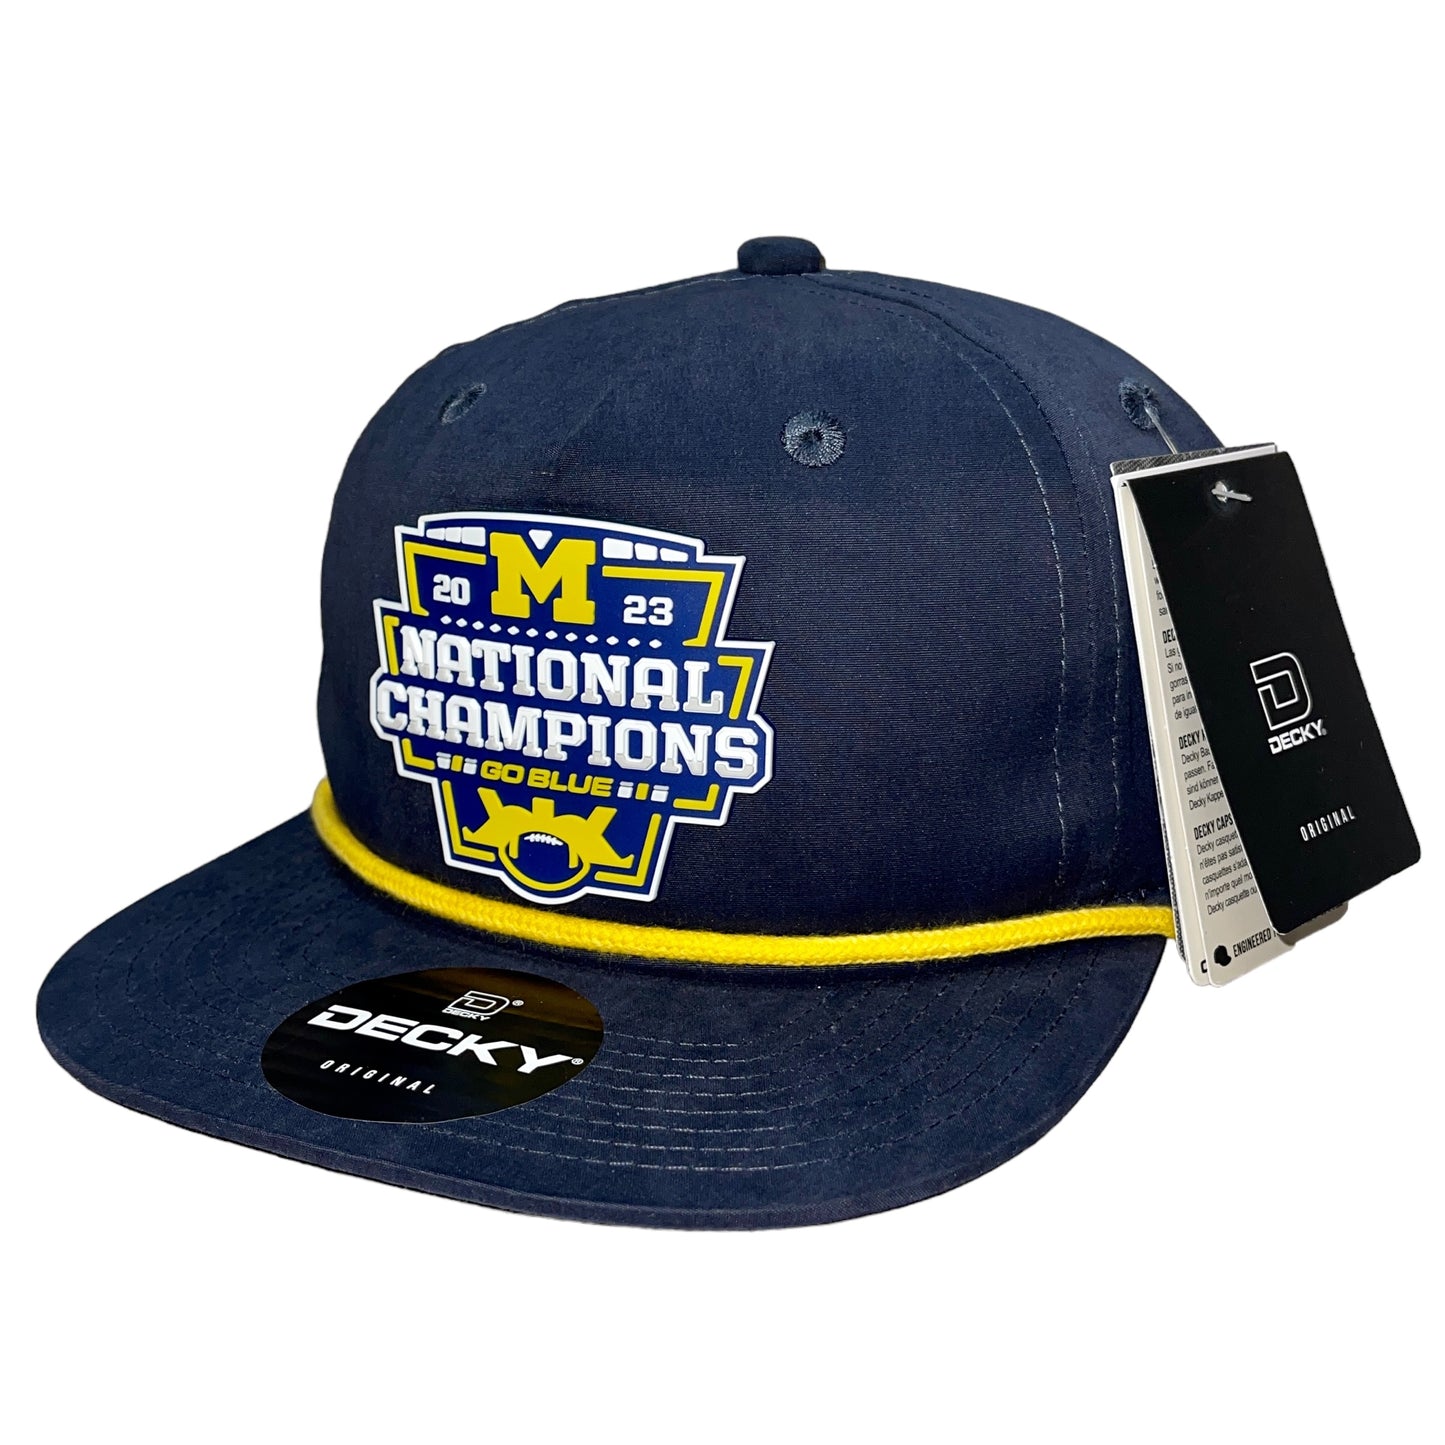 Michigan College Football Playoff 2023 National Champions 3D Classic Rope Hat- Navy/ Gold - Ten Gallon Hat Co.